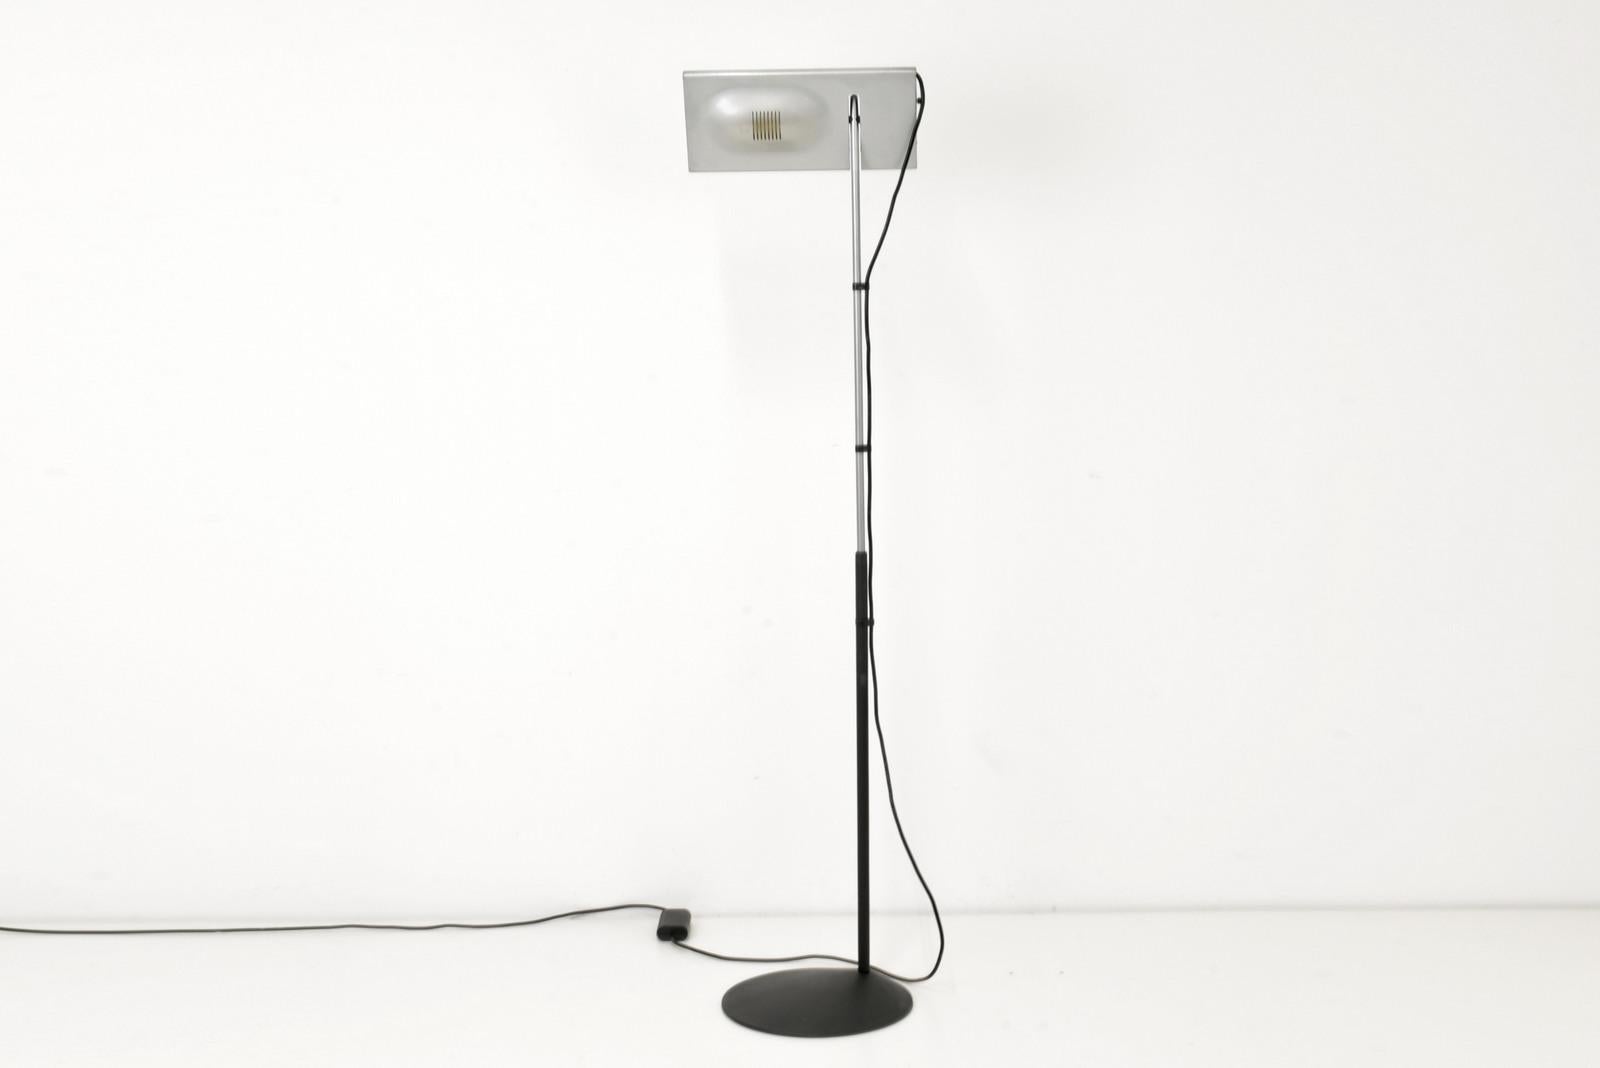 Dimensions: H 135 cm - 192 cm W 40 cm D 32 cm

Material: Aluminum silver lacquered, aluminum and cast iron matt black lacquered

Condition: Good original condition

Special features: Slight signs of use. Halogen rod 300 watt with sliding